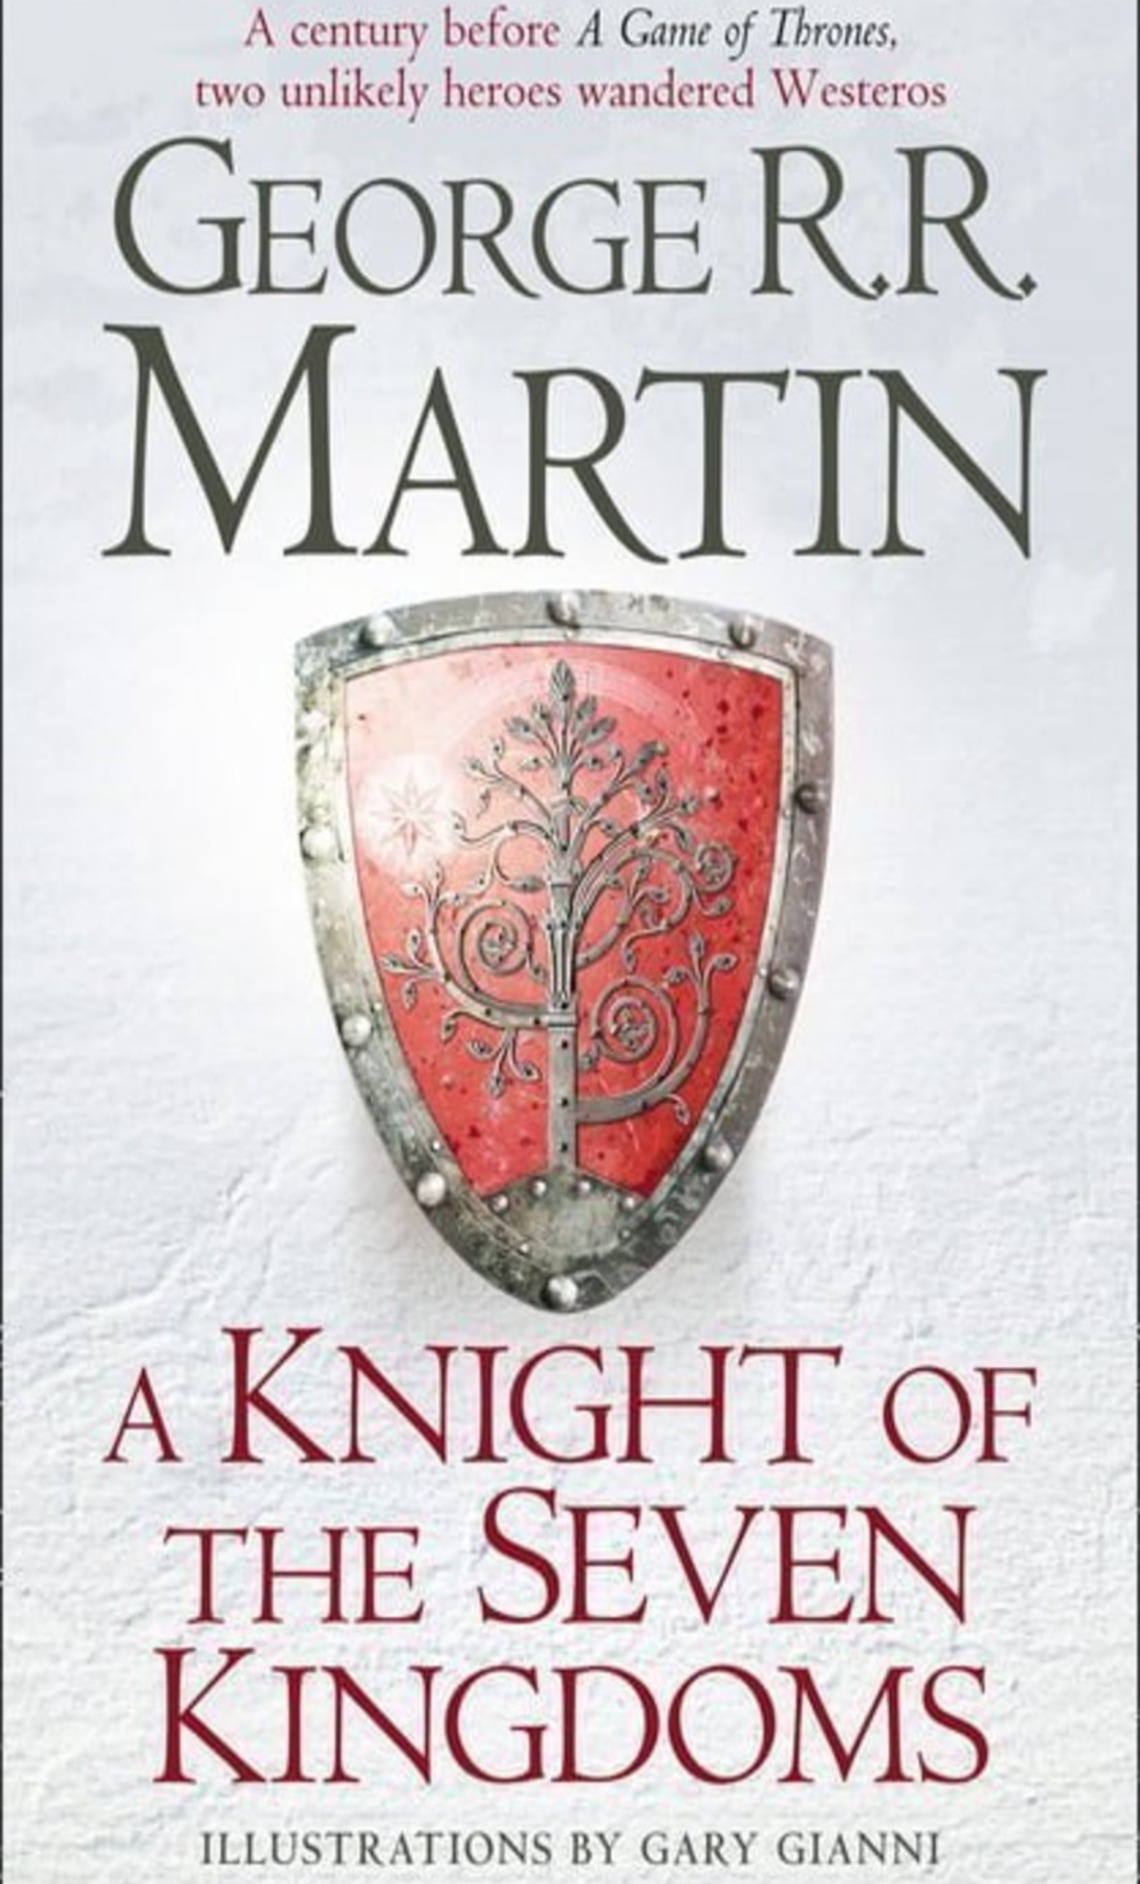 HBO Moves Forward With ‘A Knight of the Seven Kingdoms’ Spin-Off Series